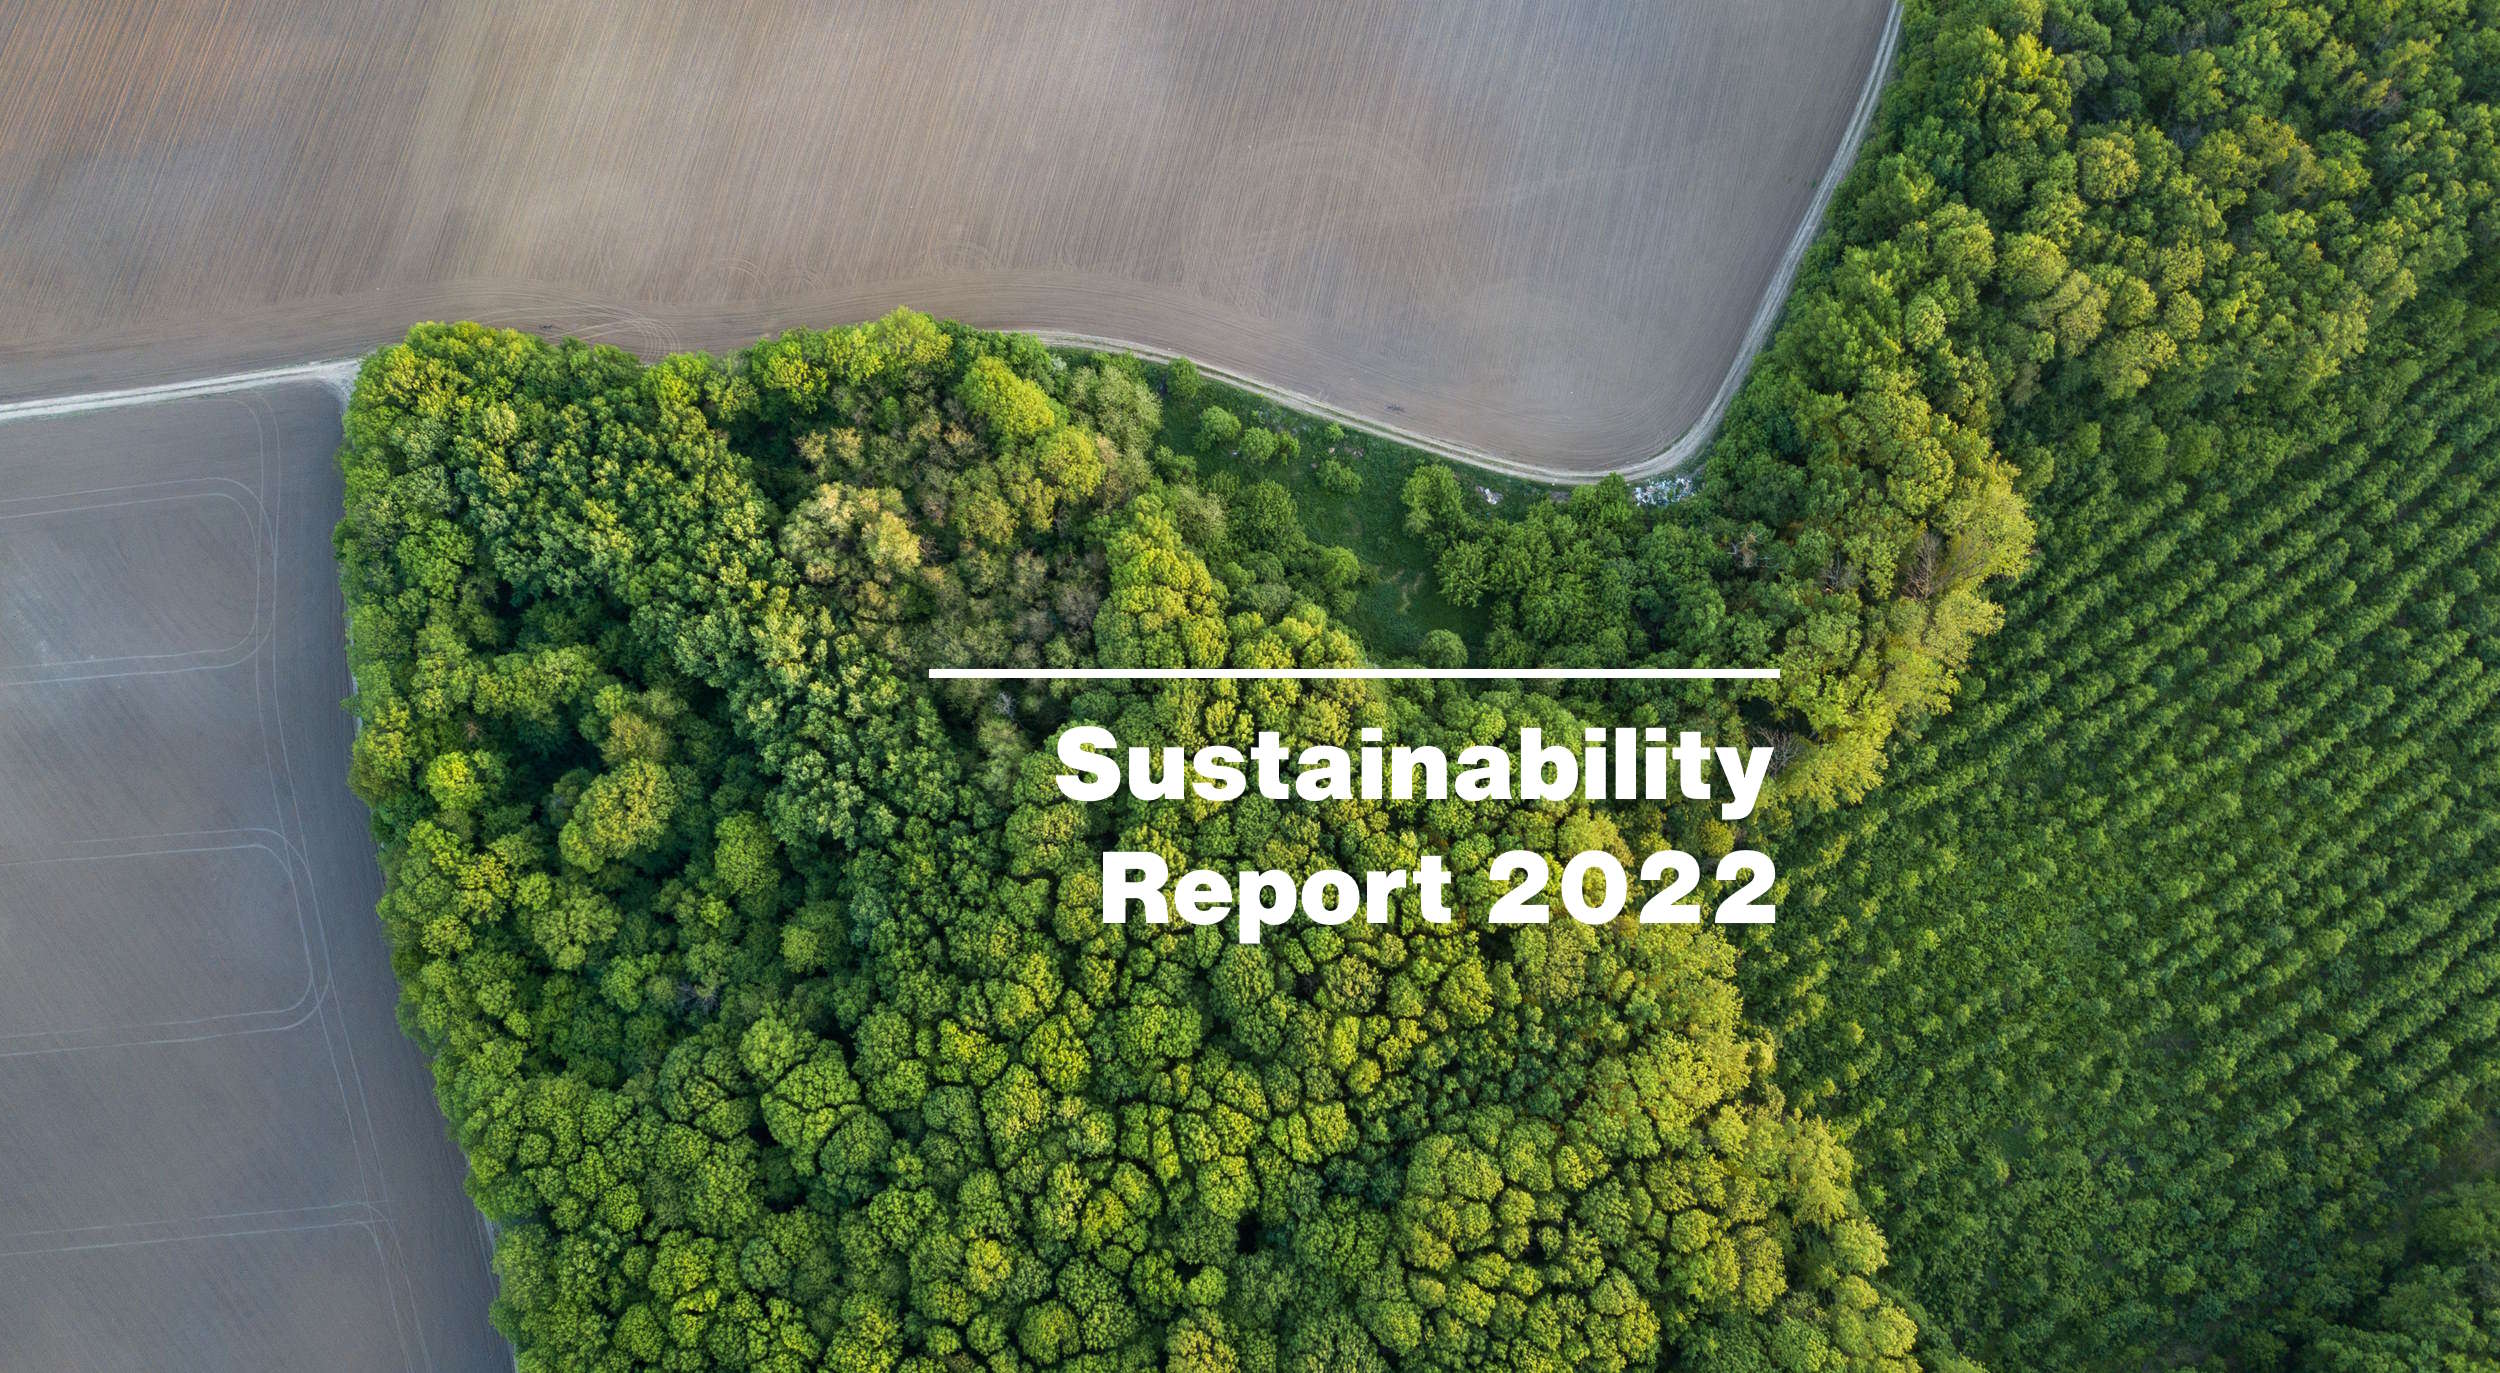 CABB Group publishes an expanded Sustainability Report for 2022